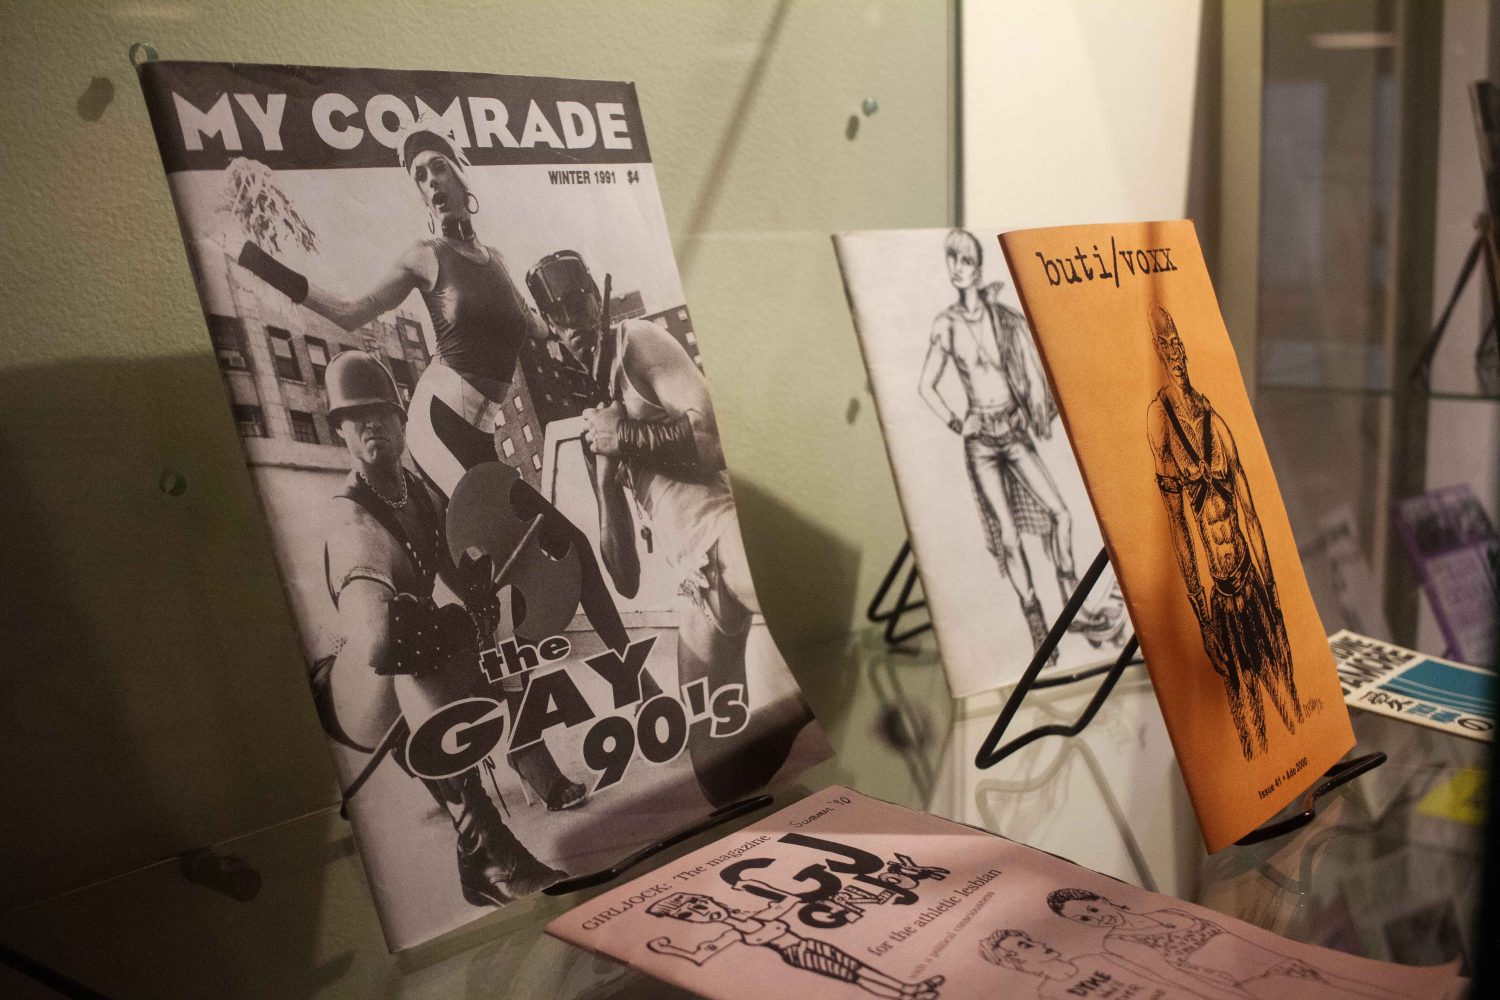 Issue No. 8 of the zine "My Comrade," published in 1991, about the Gay'90s bar in Minneapolis, on display at Open Book in Minneapolis, on Wednesday, Nov. 29, 2023. (Photo/Adria Carpenter)